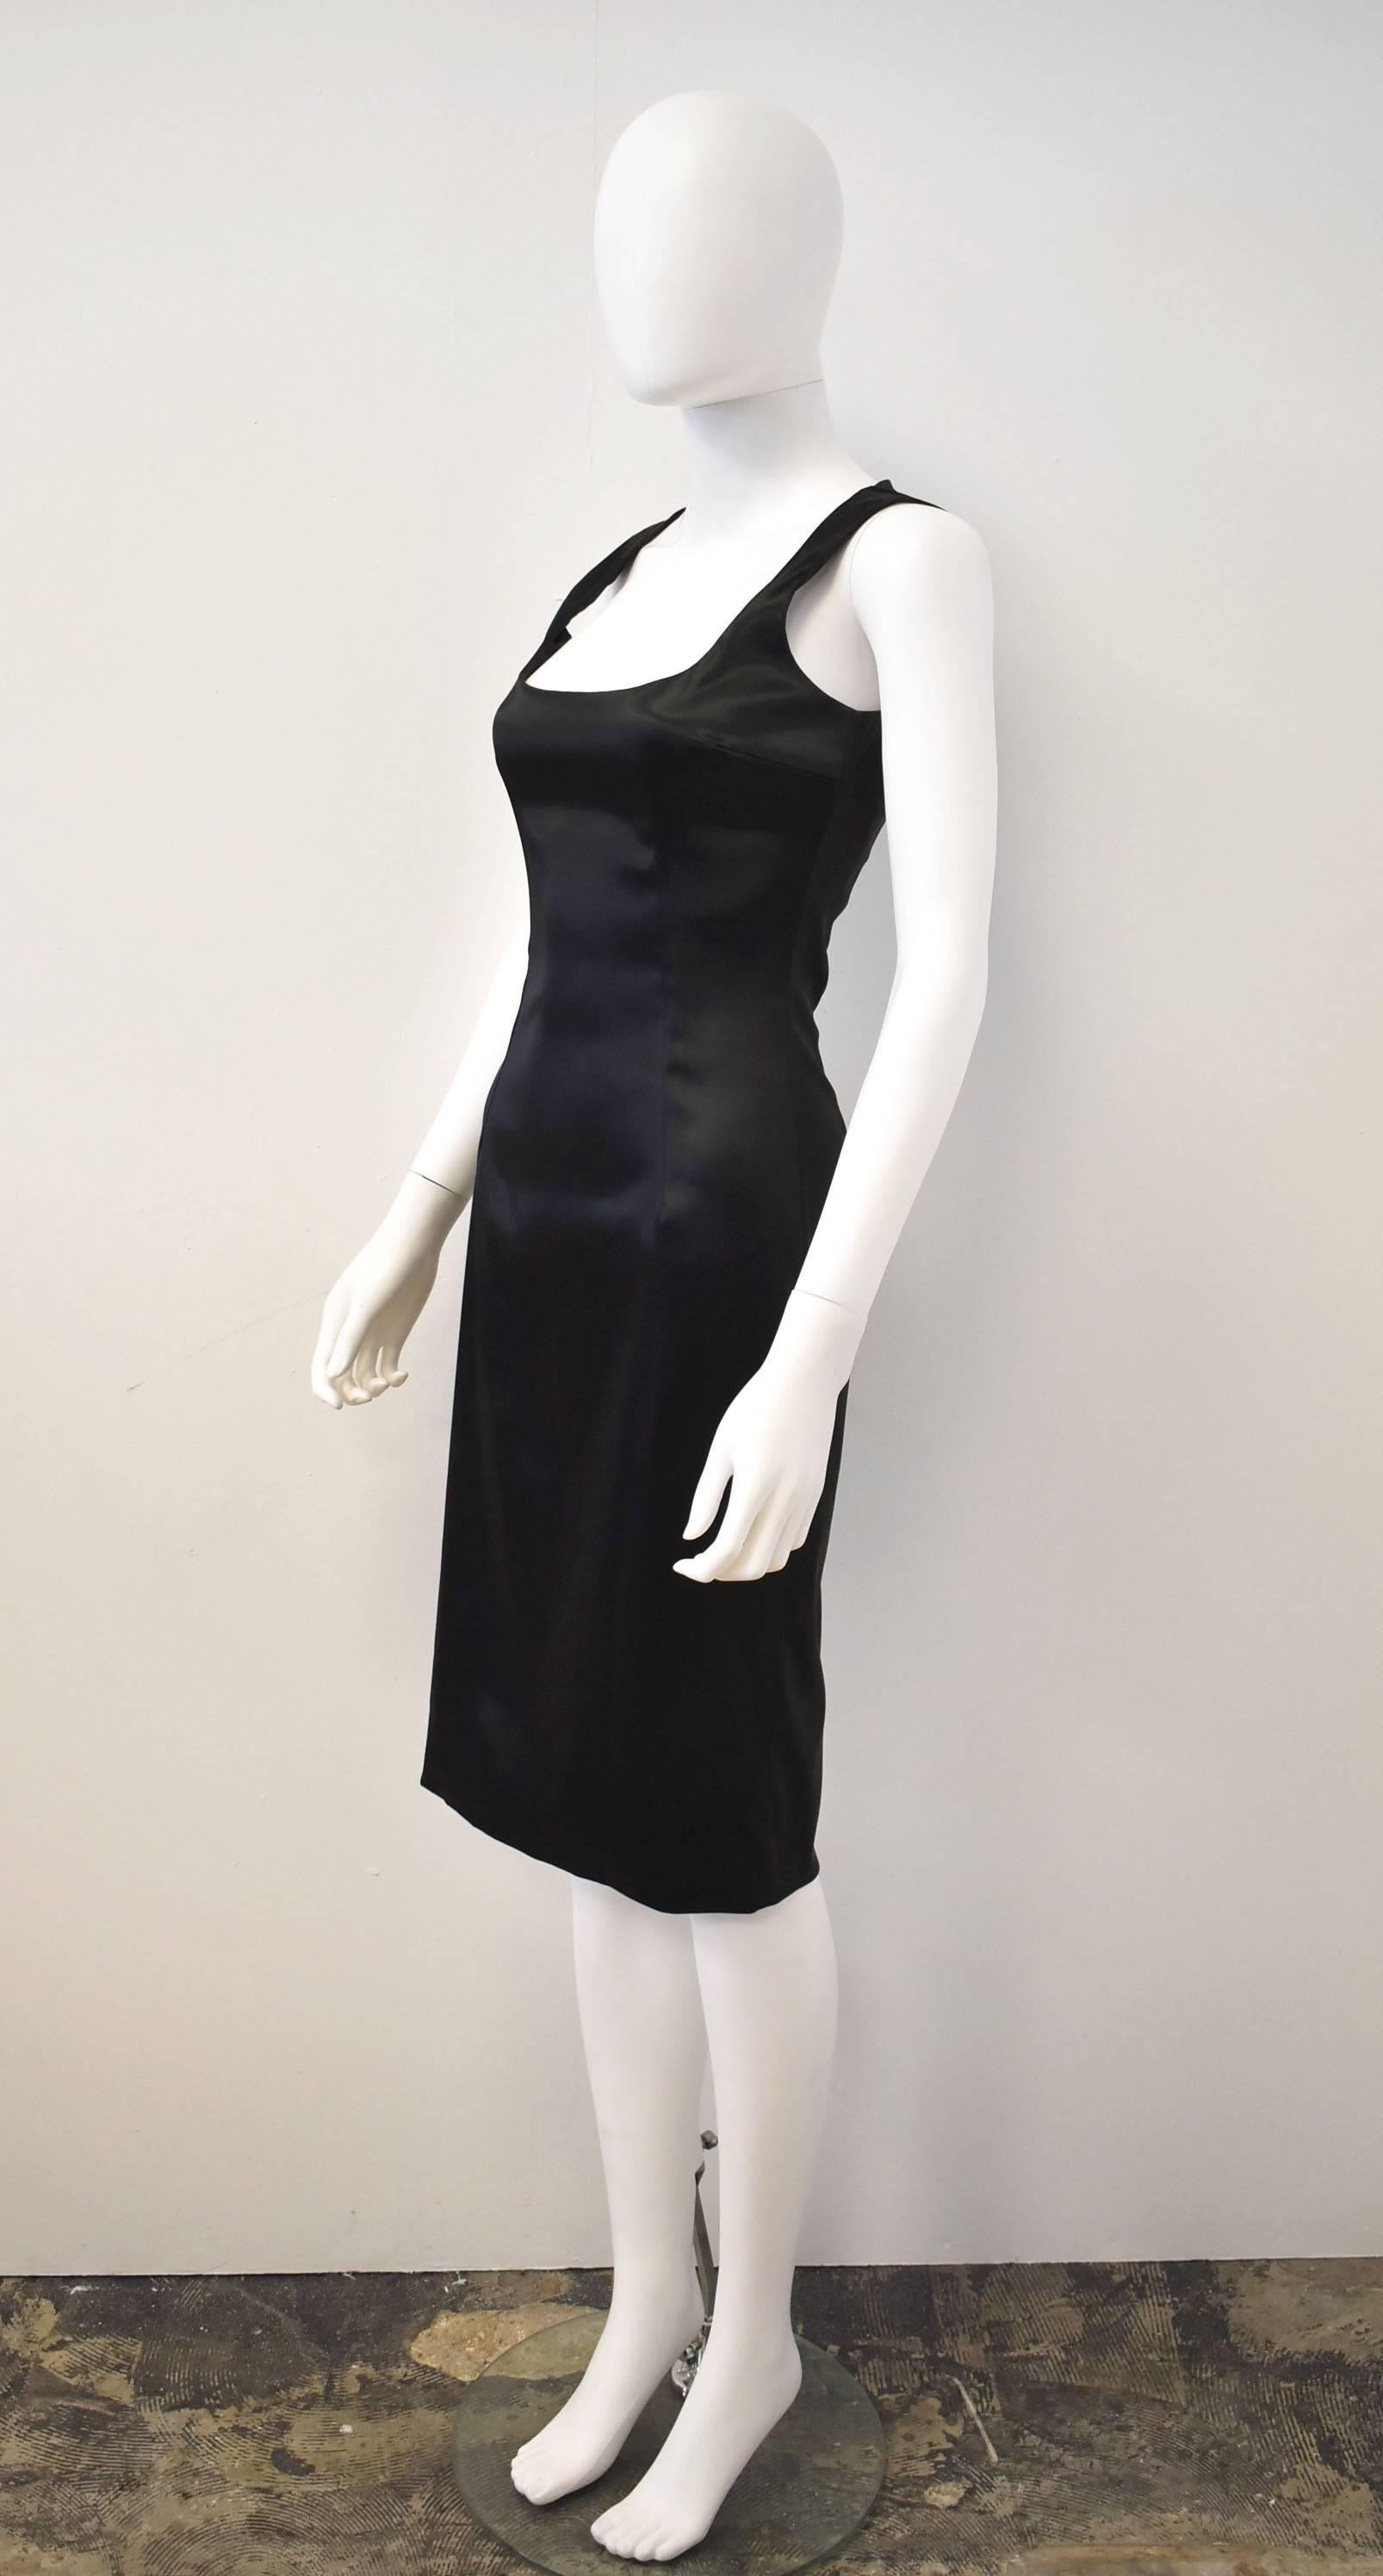 Sexy and elegant Little Black Dress by Dolce and Gabbana. The dress is a simple shift dress but it’s form-fitting shape hugs the body and clings to curves. The dress is sleeveless with a zip-fastening at the back and a slit at the back for ease of